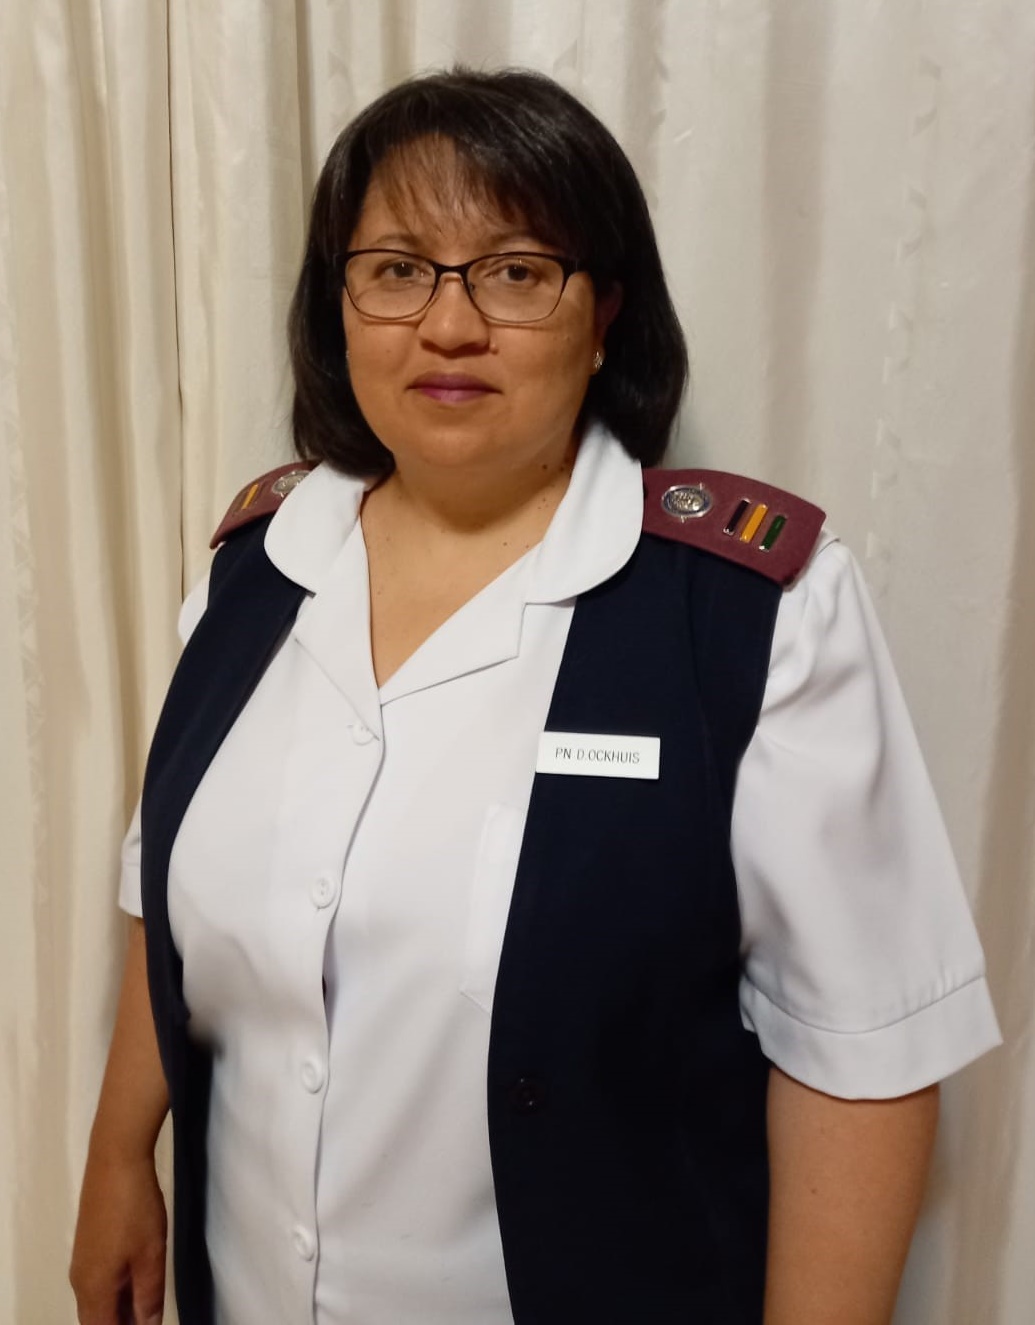 Sr Daphne Ockhuis is passionate about palliative care and encourages family to make use of the service. Sr Ockhuis works for Kheth'Impilo, an NPO, that works closely with the Kraaifontein CHC.